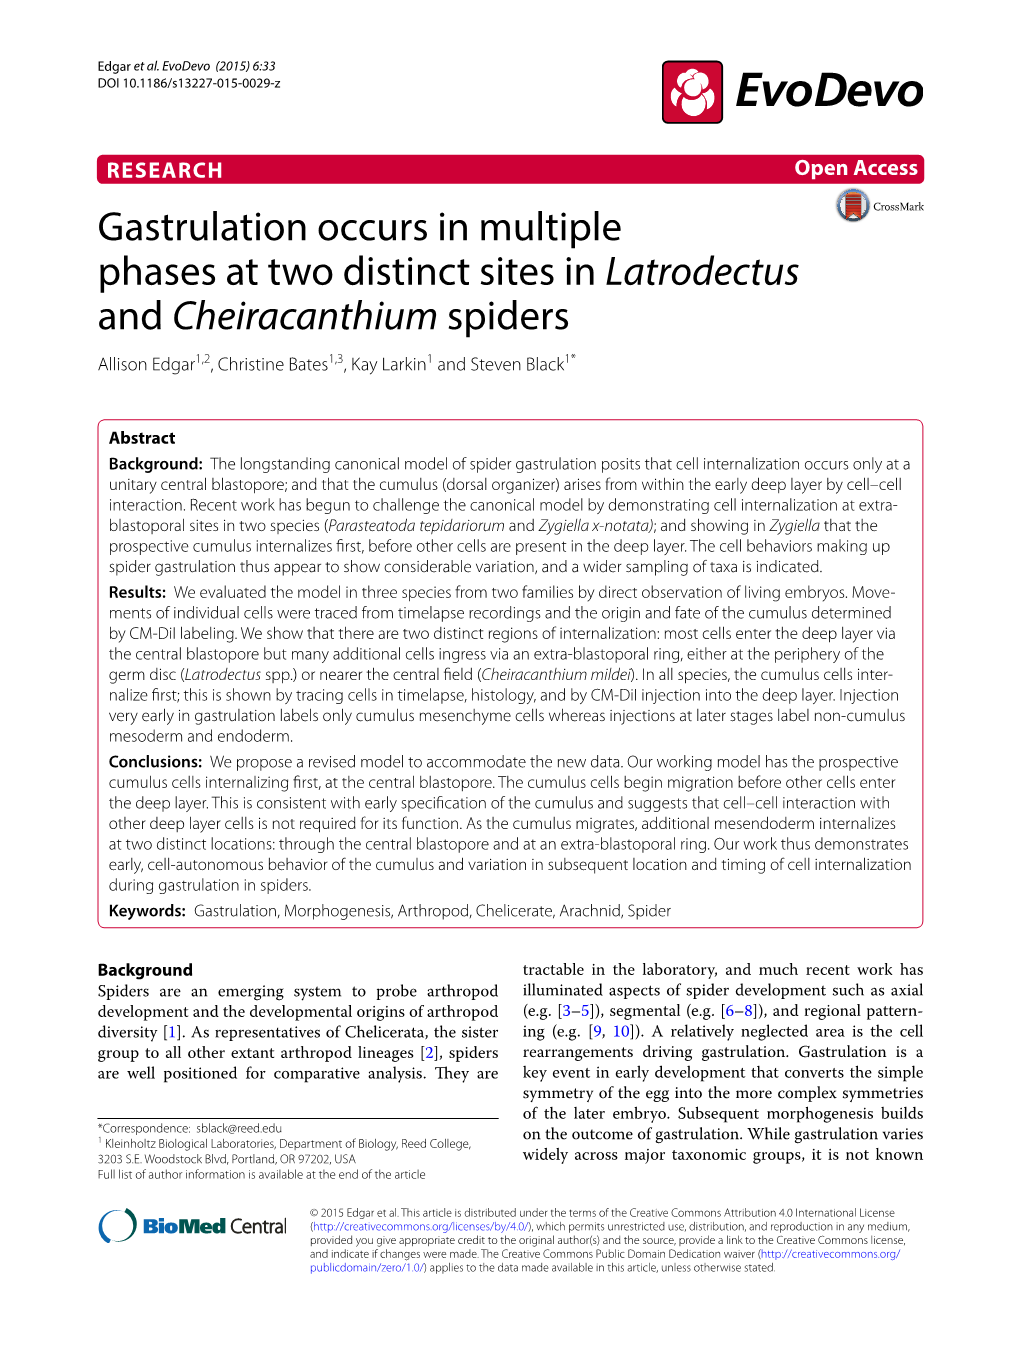 Gastrulation Occurs in Multiple Phases at Two Distinct Sites in Latrodectus